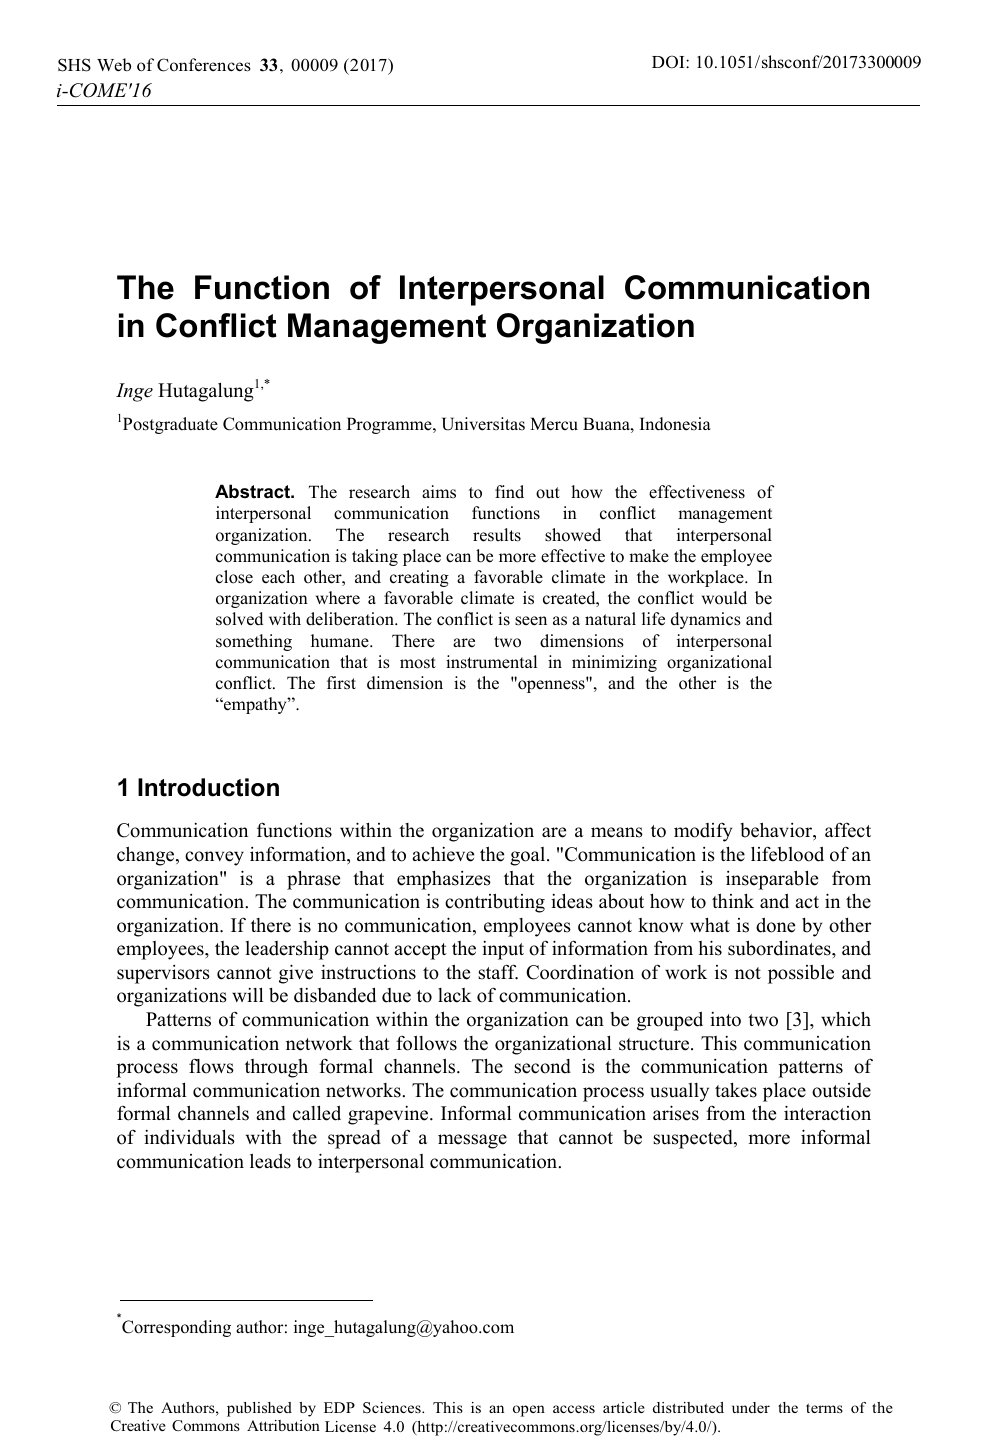 interpersonal communication research paper topics